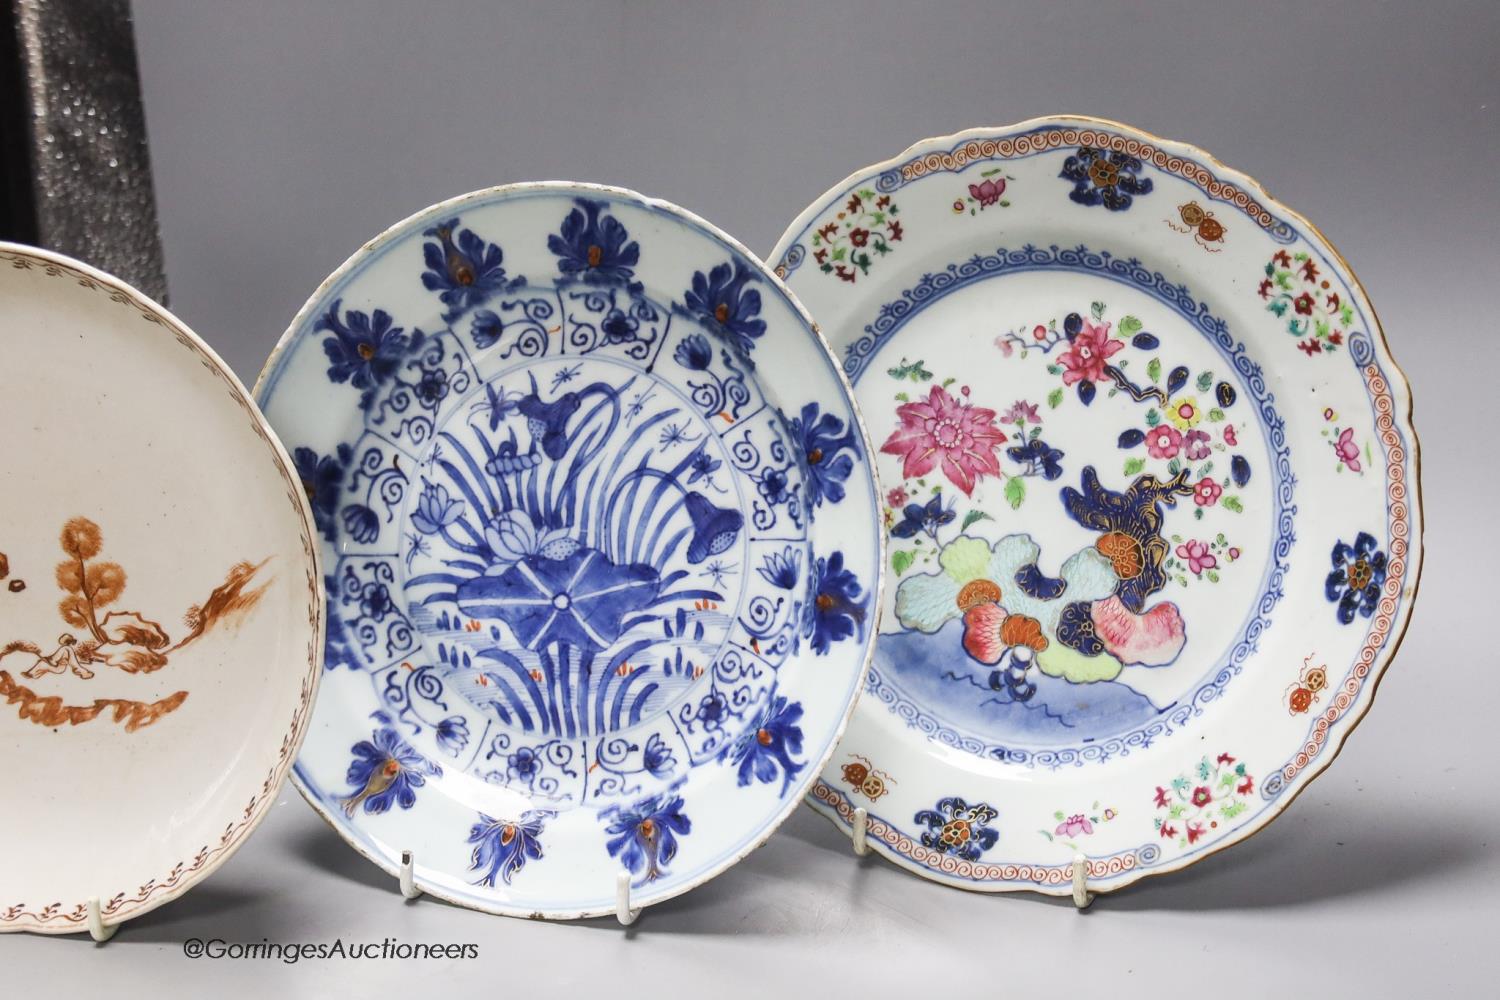 Three Chinese porcelain plates or dishes, largest diameter 23cm - Image 3 of 5